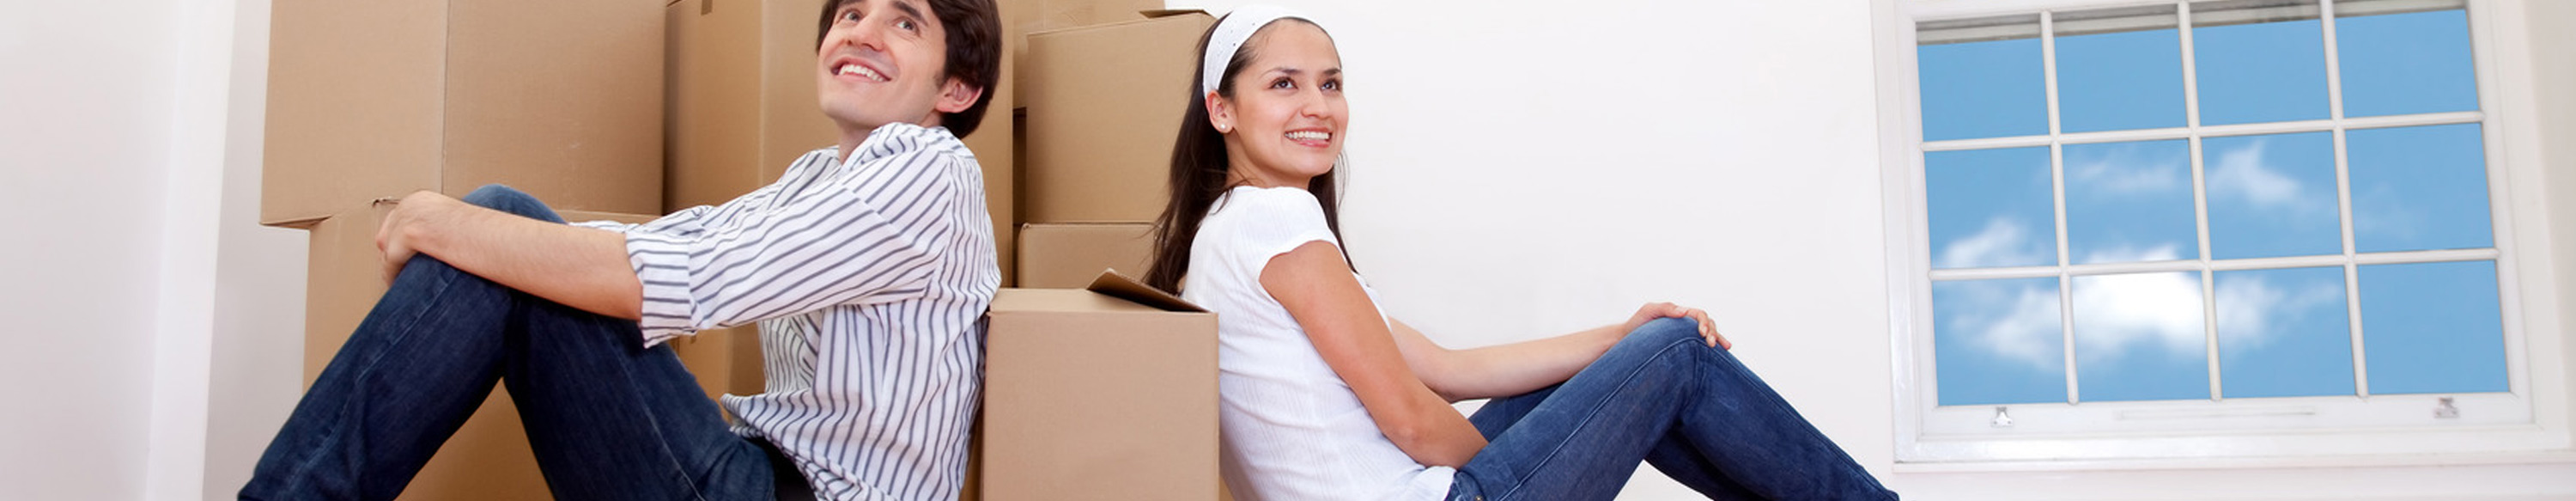 Moving Services In Gainesville, FL